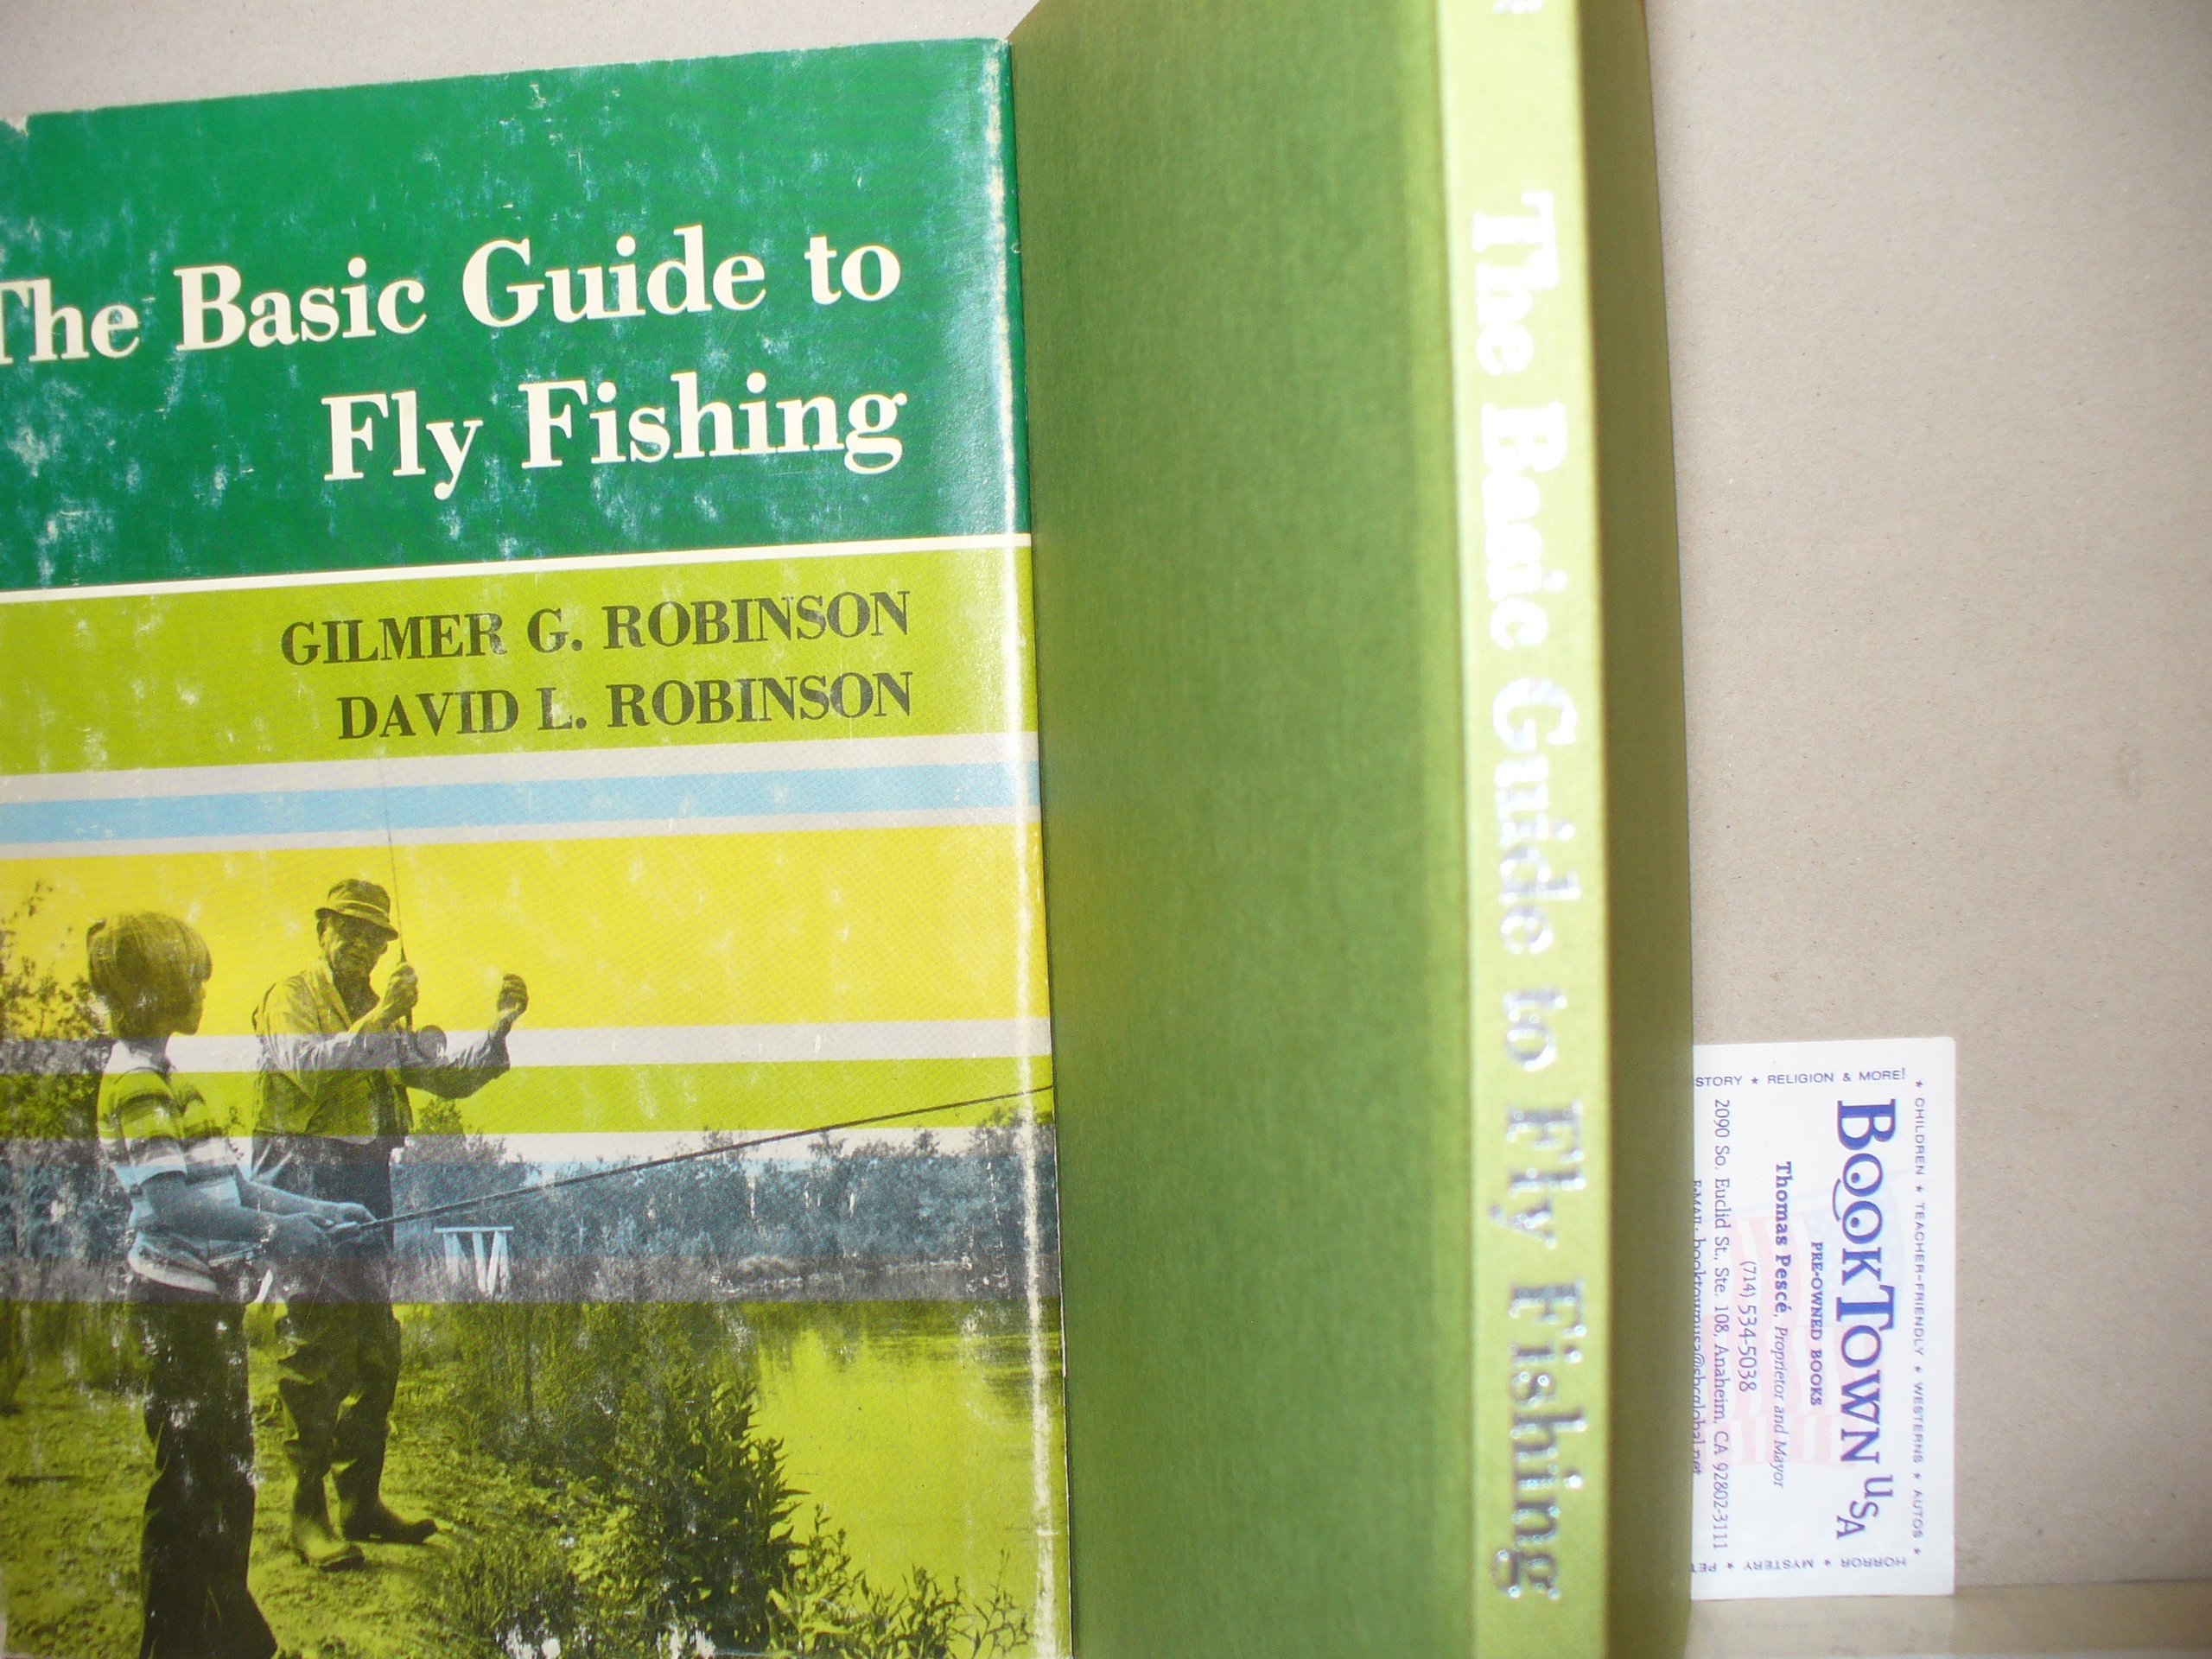 The Basic Guide to Fly Fishing